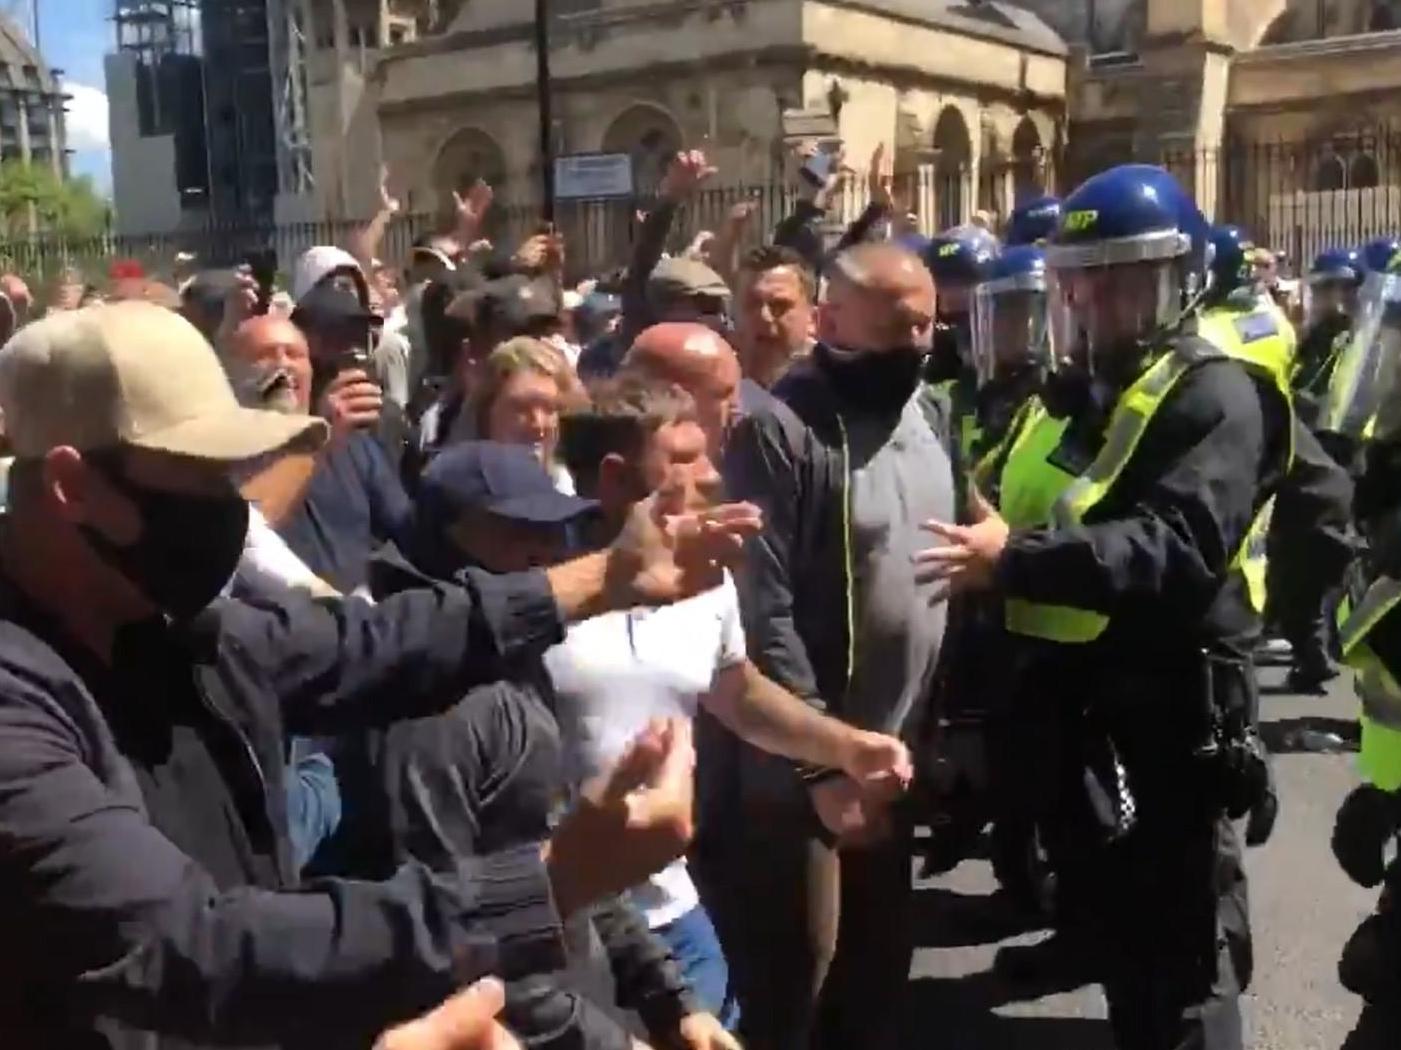 London protests: Demonstrators throw bottles and run into police as they 'defend' memorials